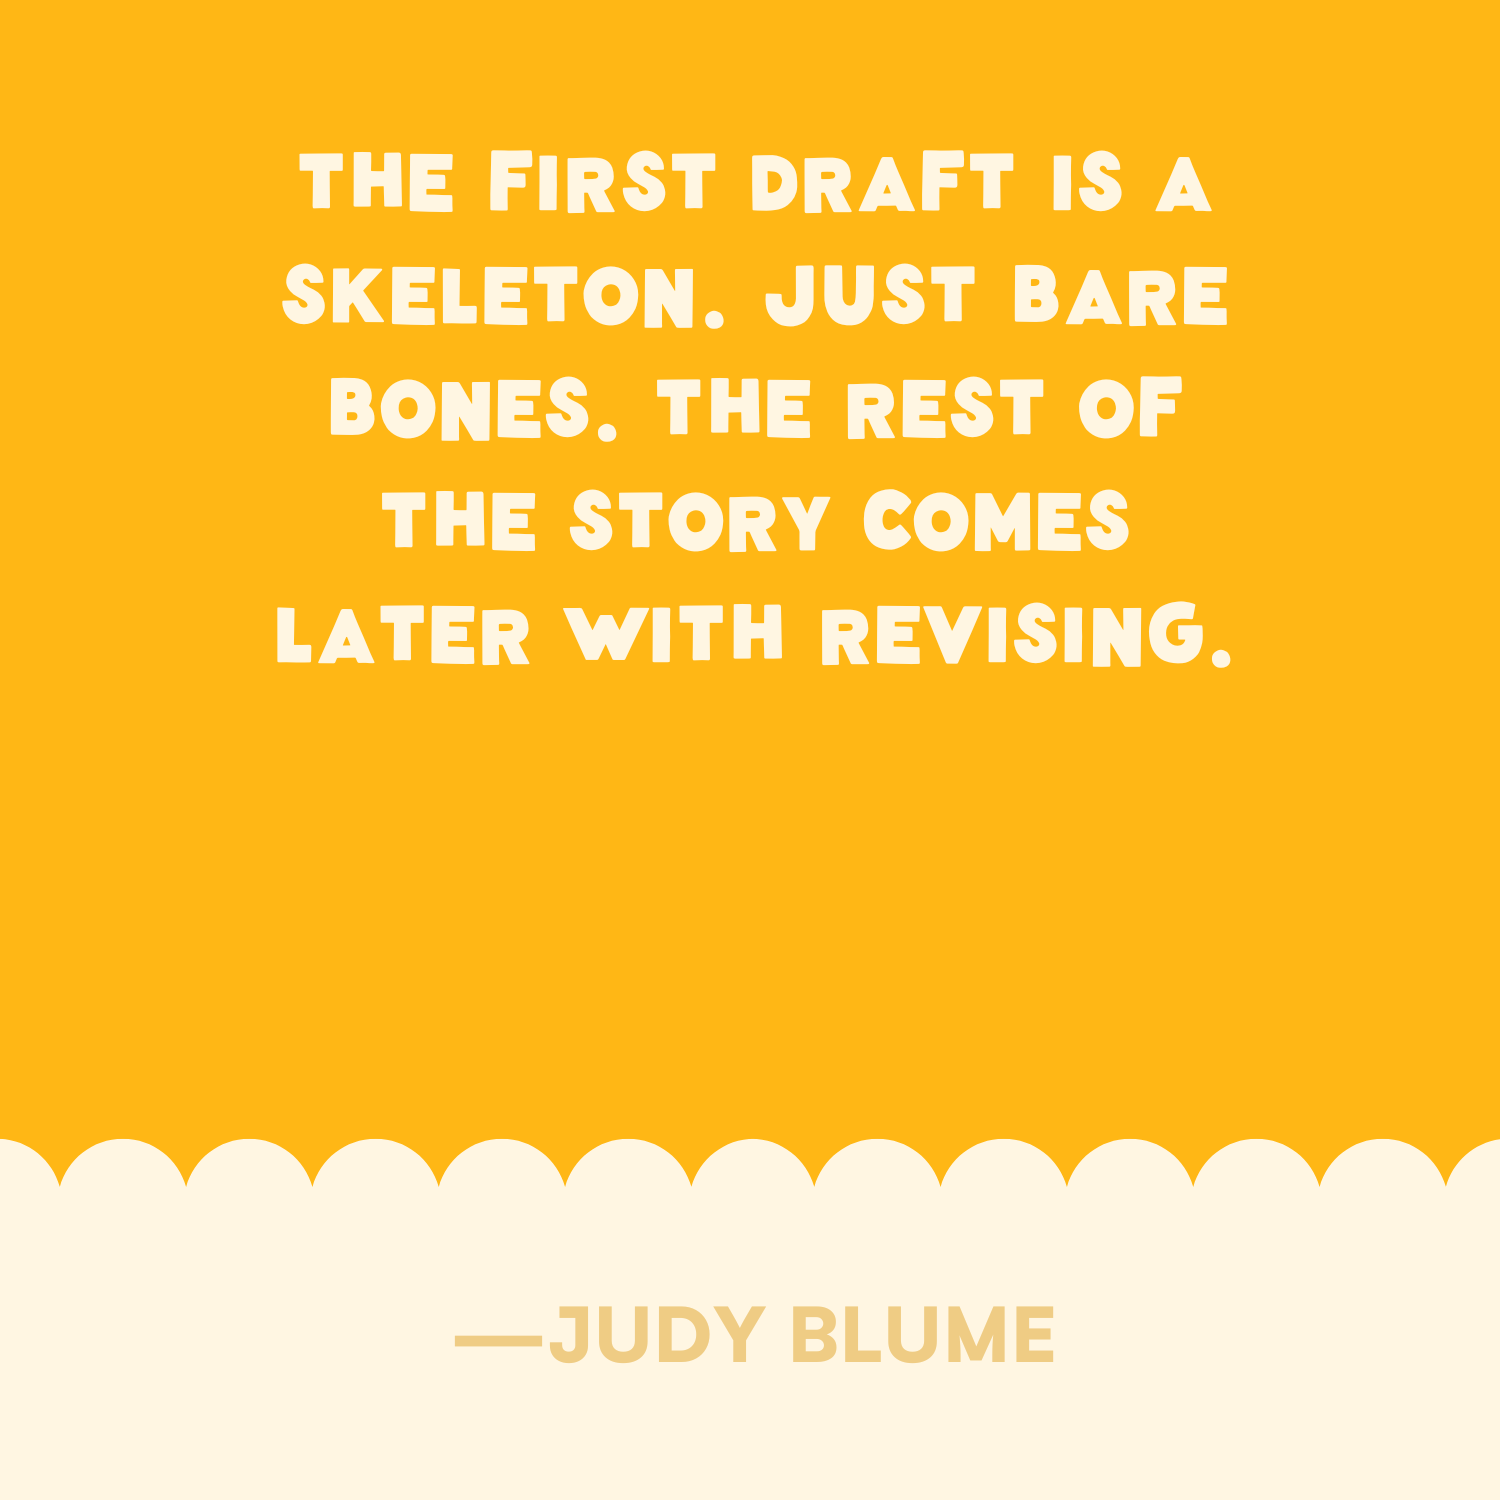 <p>"The first draft is a skeleton. Just bare bones. The rest of the story comes later with revising." —Judy Blume </p>